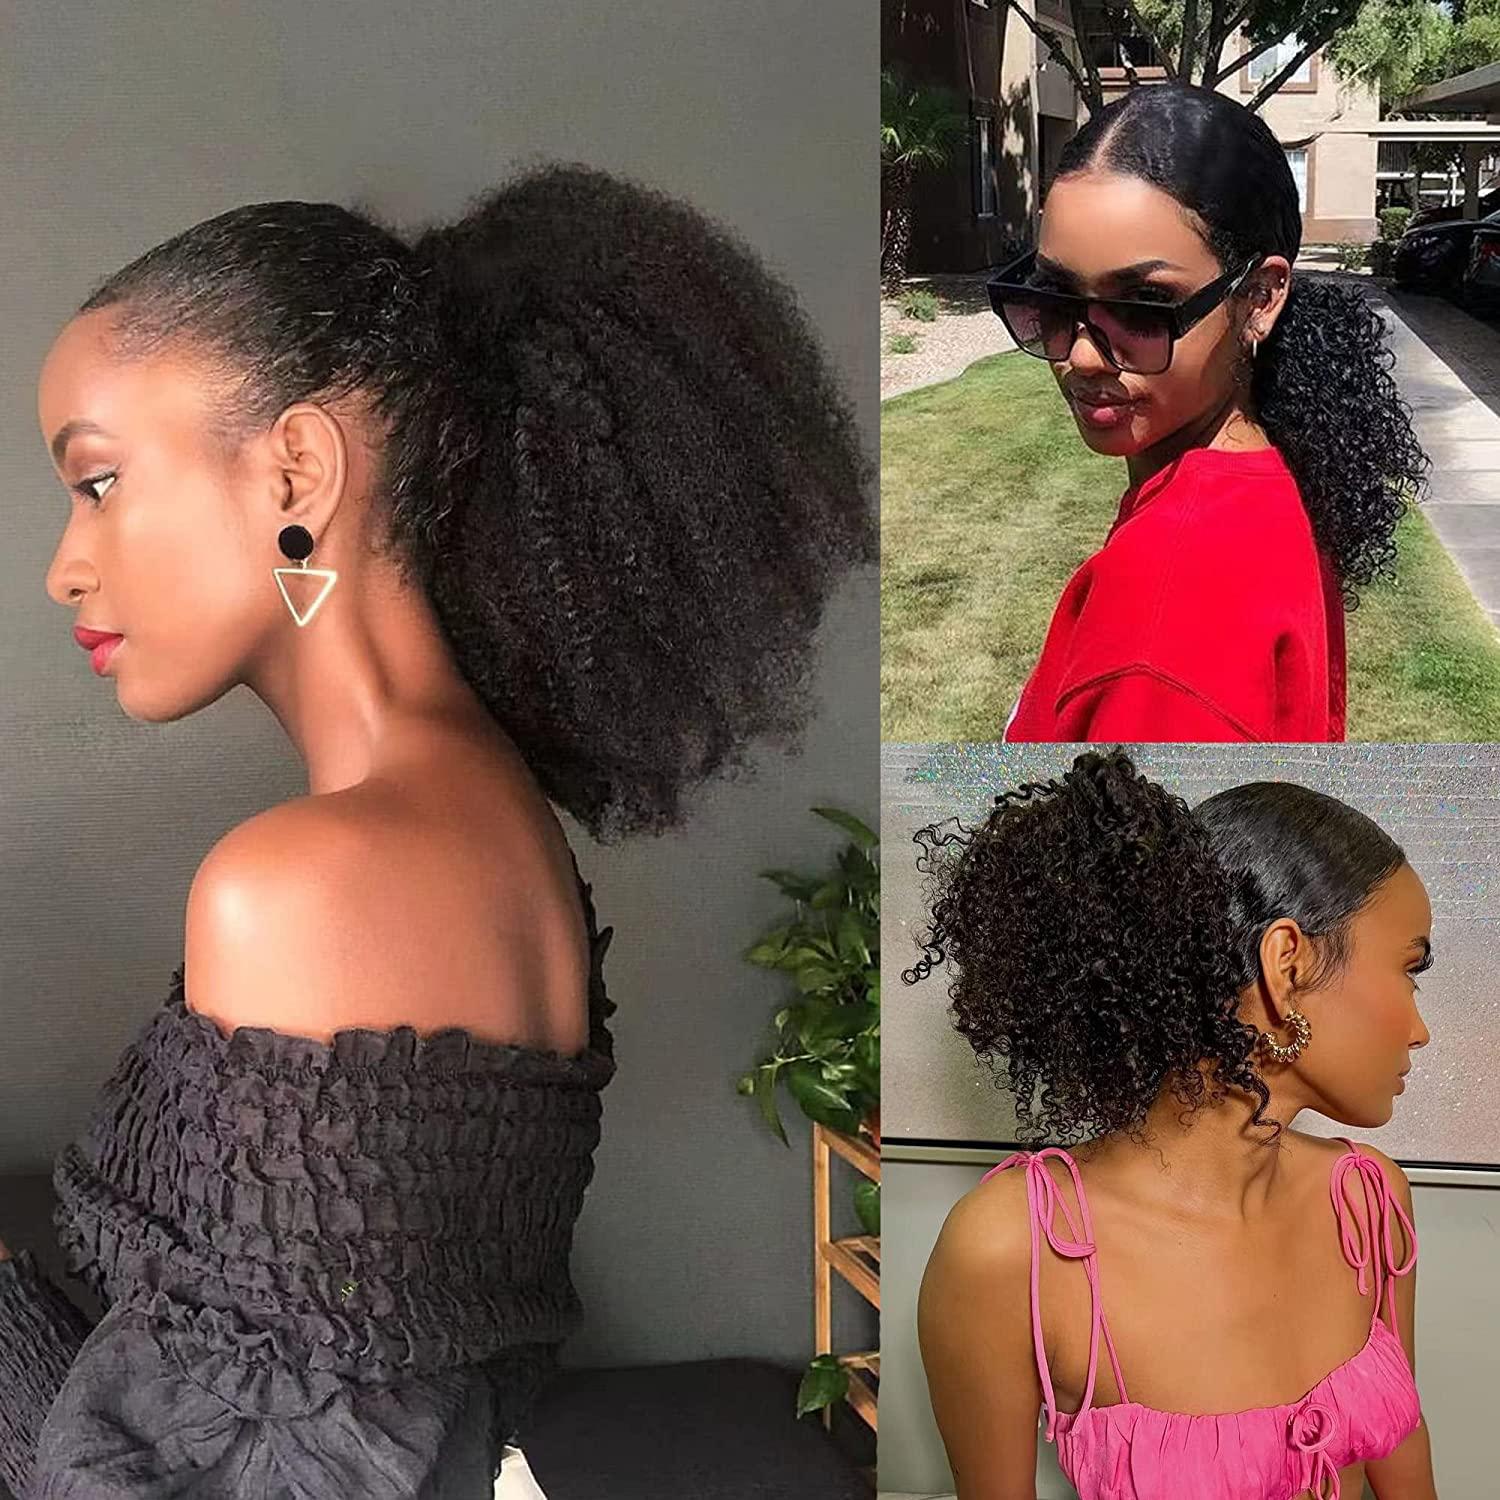 HLSK Afro Puff Drawstring Ponytail Human Hair for Black Women(14 Inch),  150% Density 10A Brazilian Virgin Human Hair Ponytail, 3A 4C Afro Kinky  Curly Clip in Ponytail Extension for Natural Black Hair